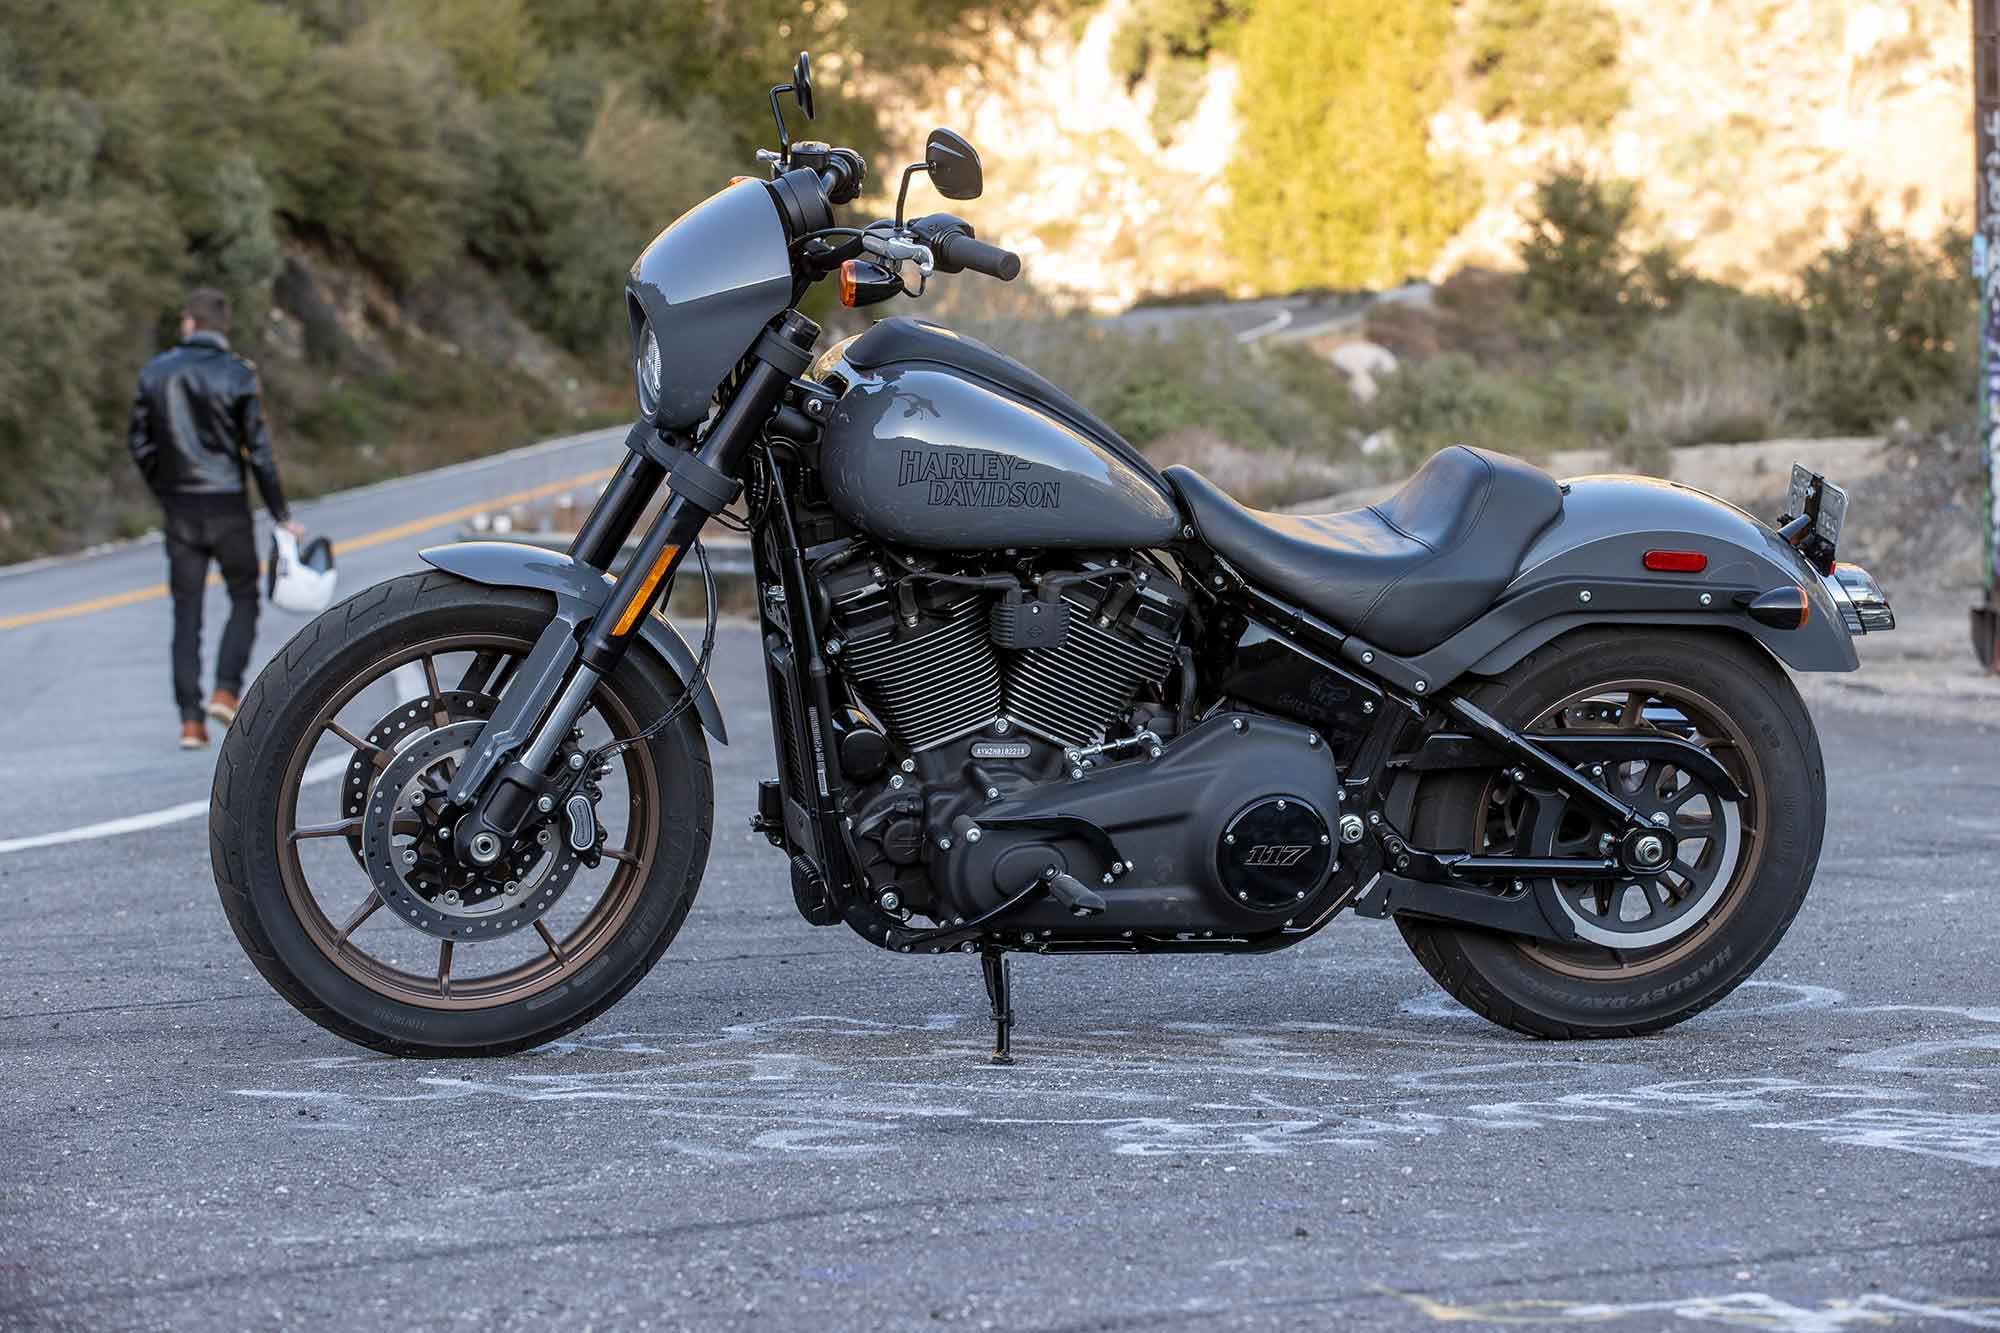 The third version of Harley-Davidson’s Low Rider S features the same defining elements you’ve come to expect from the platform: T-bars, a headlight cowl, and solo seat.